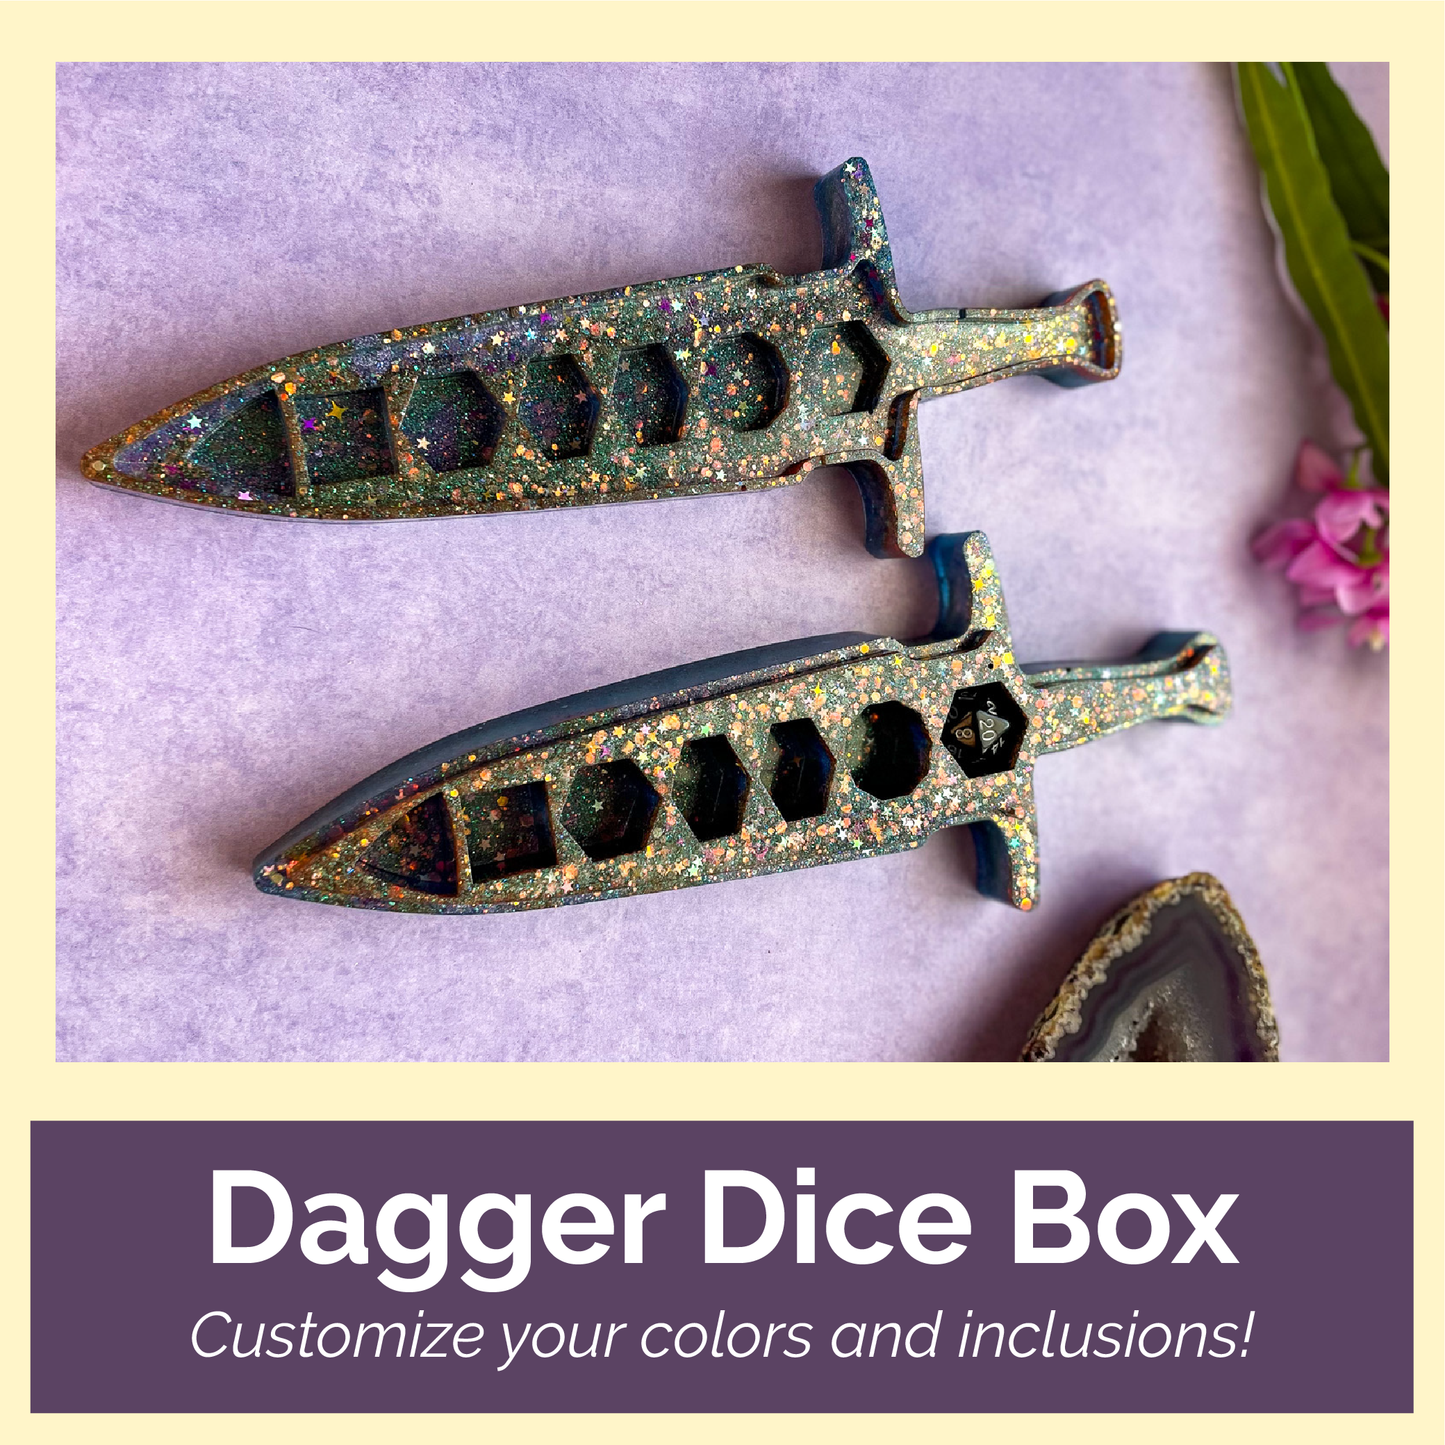 Custom Dagger Dice Boxes - customize colors and inclusions